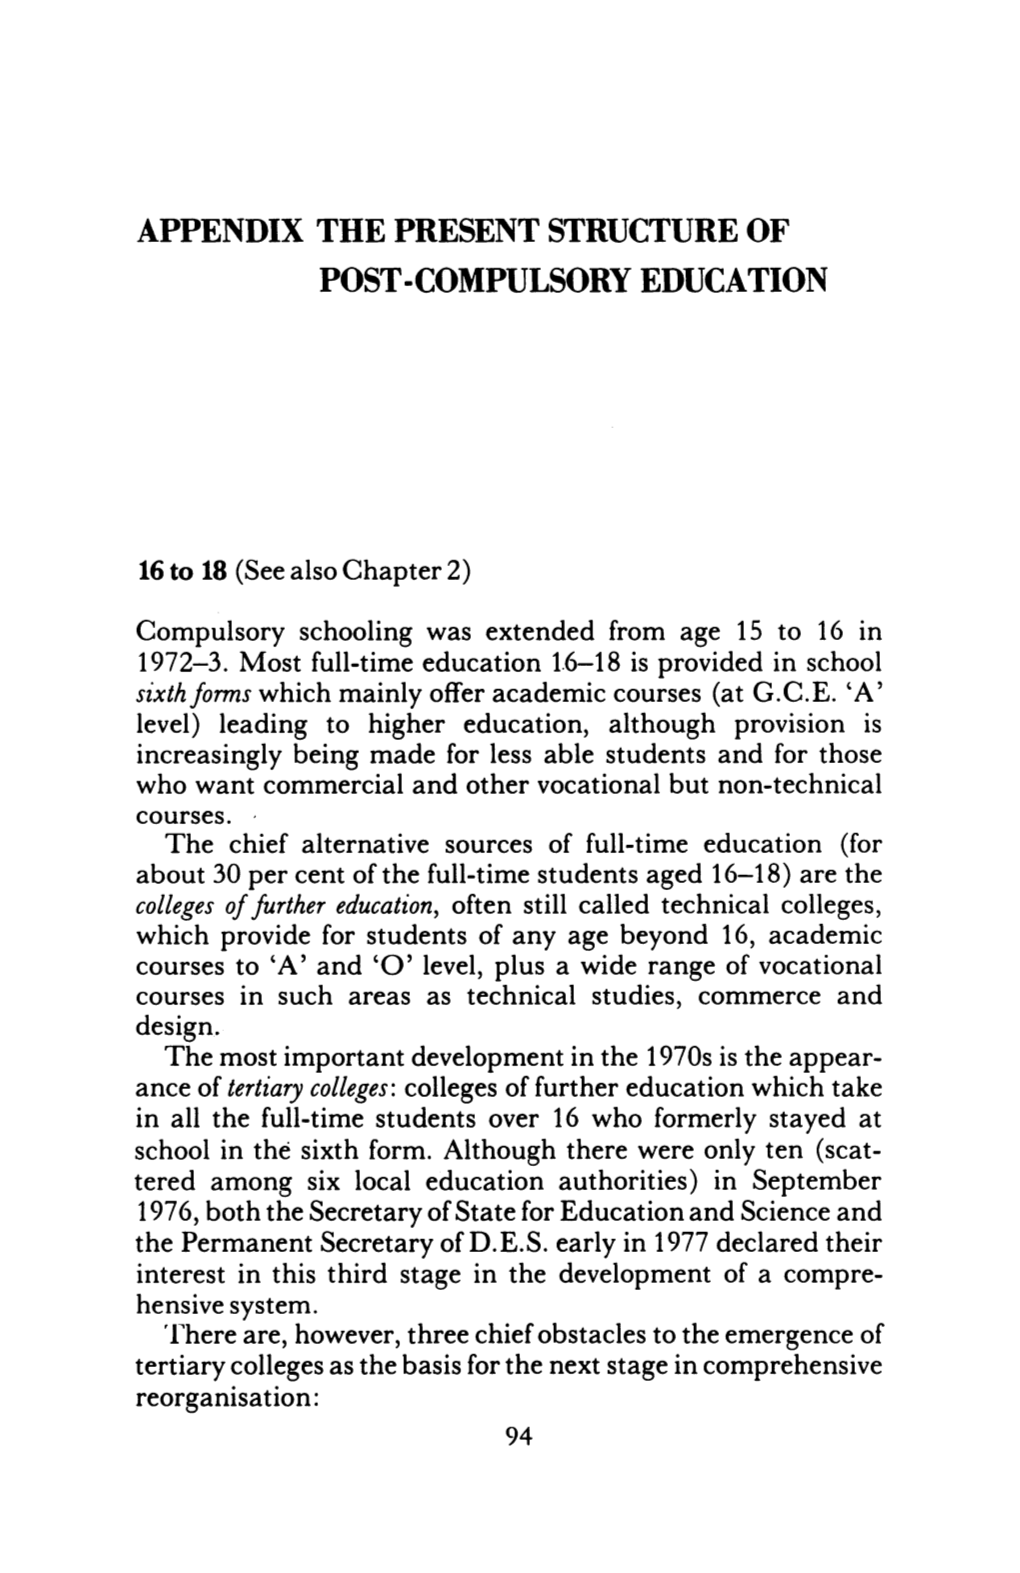 Appendix the Present Structure of Post -Compulsory Education